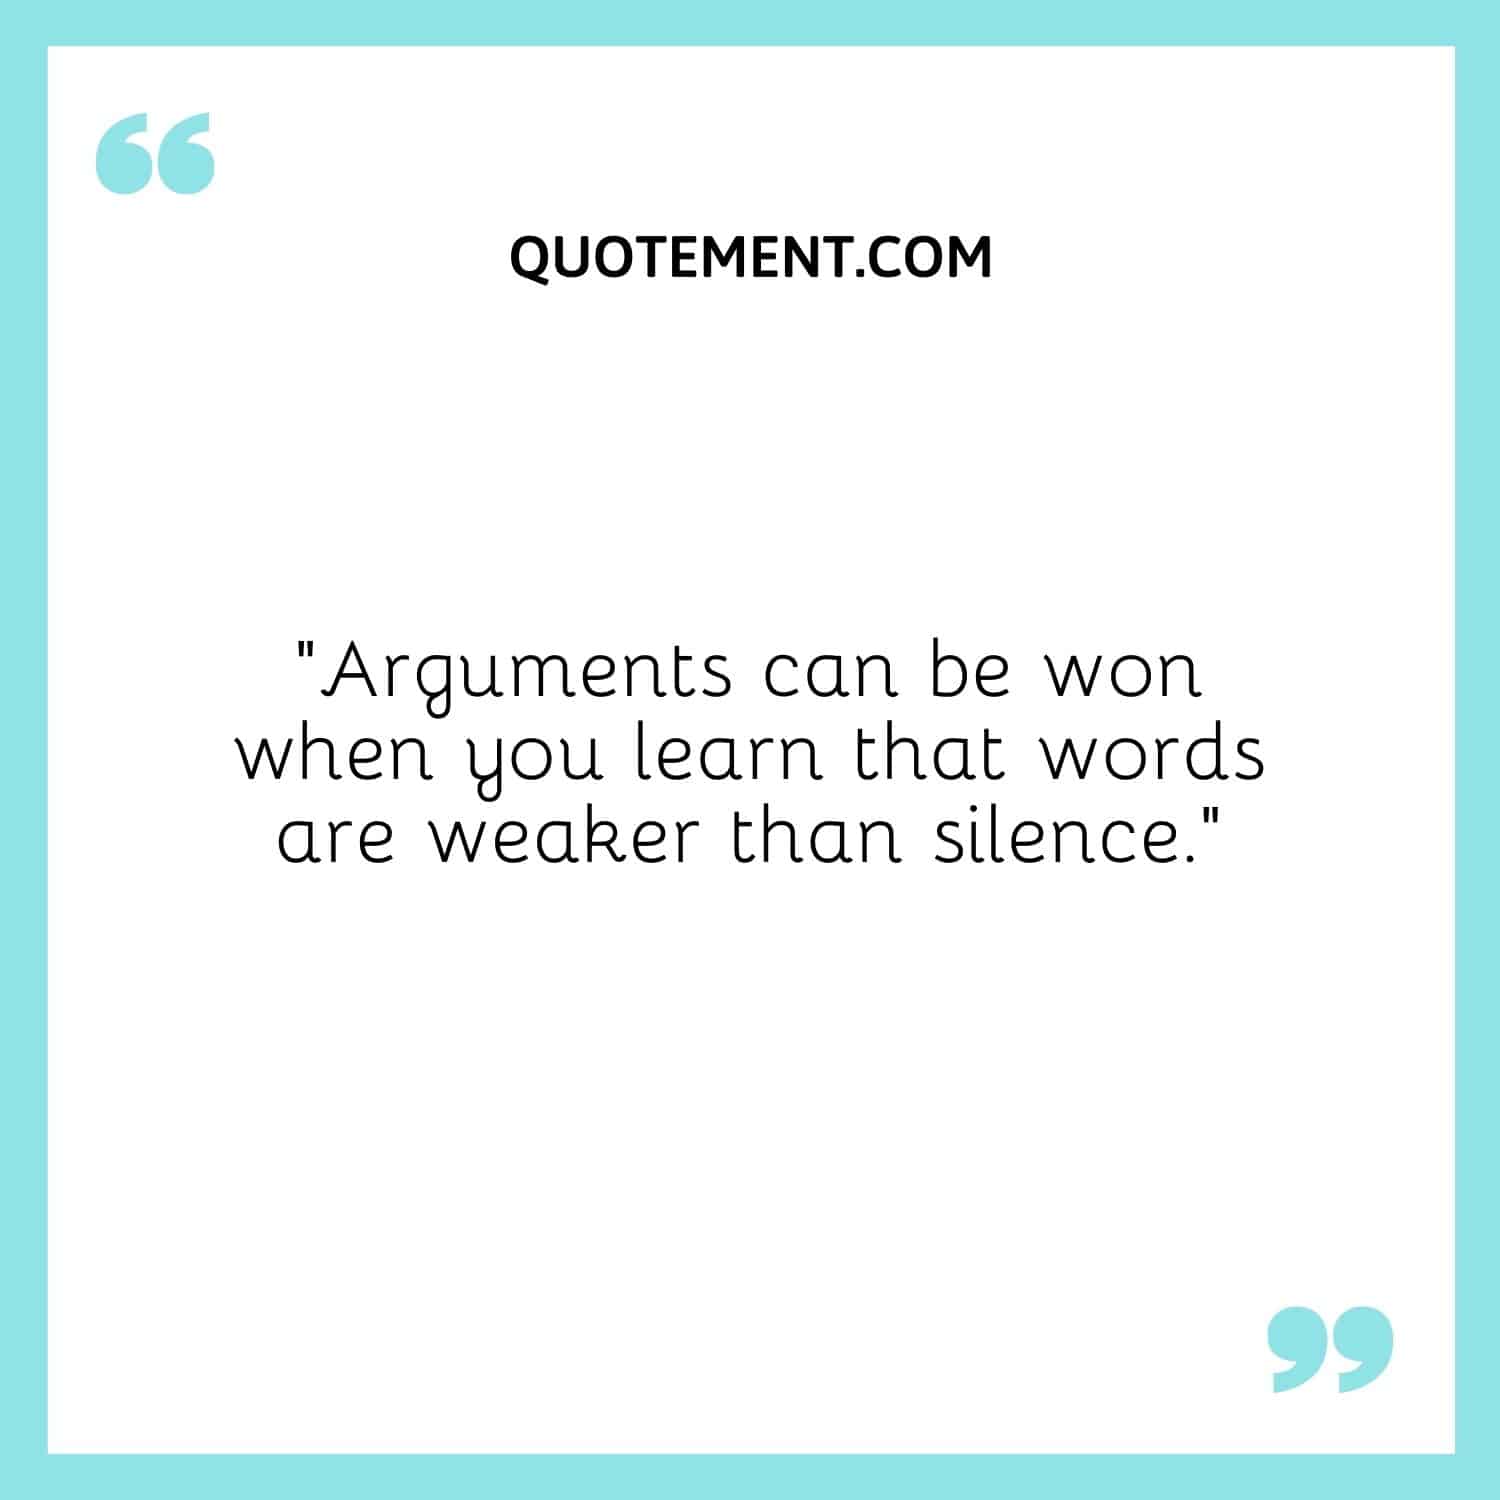 “Arguments can be won when you learn that words are weaker than silence.”